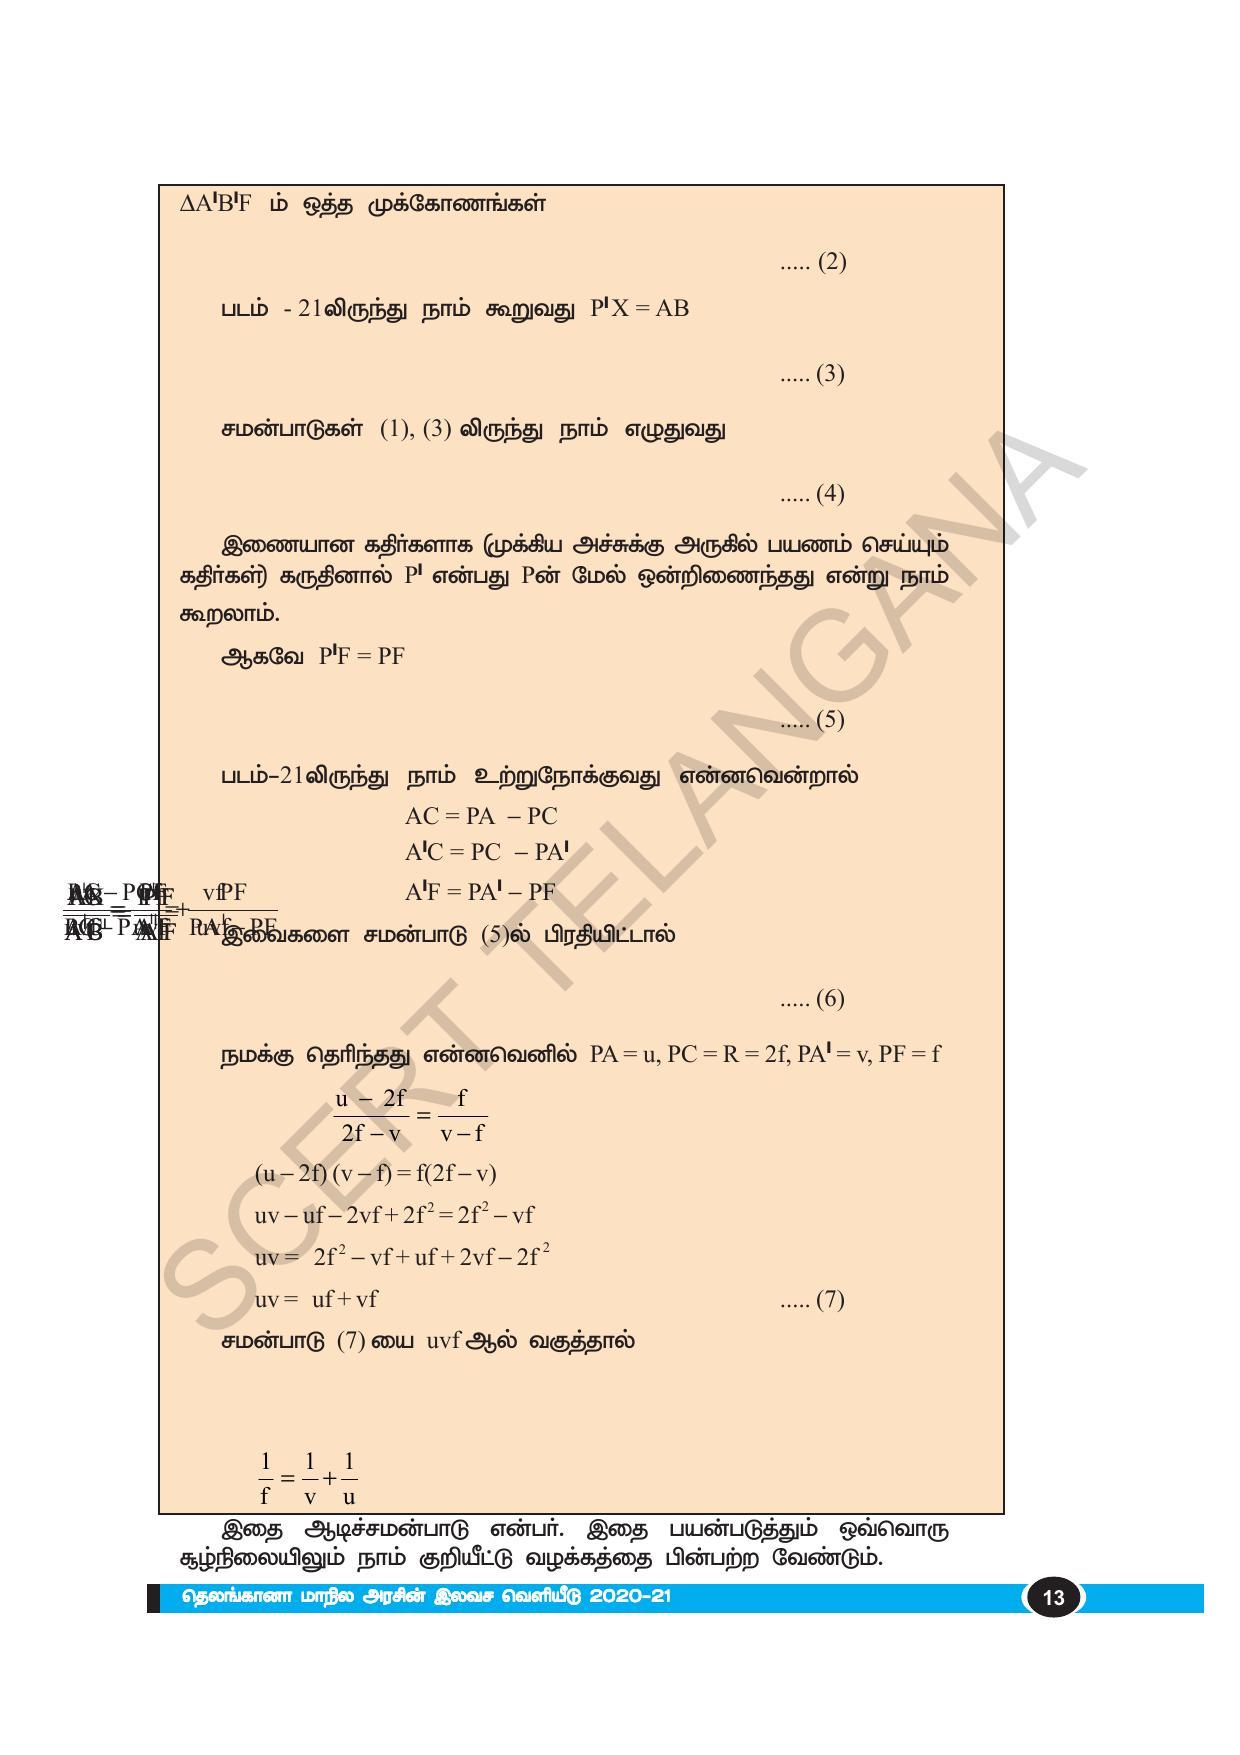 TS SCERT Class 10 Physical Science(Tamil Medium) Text Book - Page 25